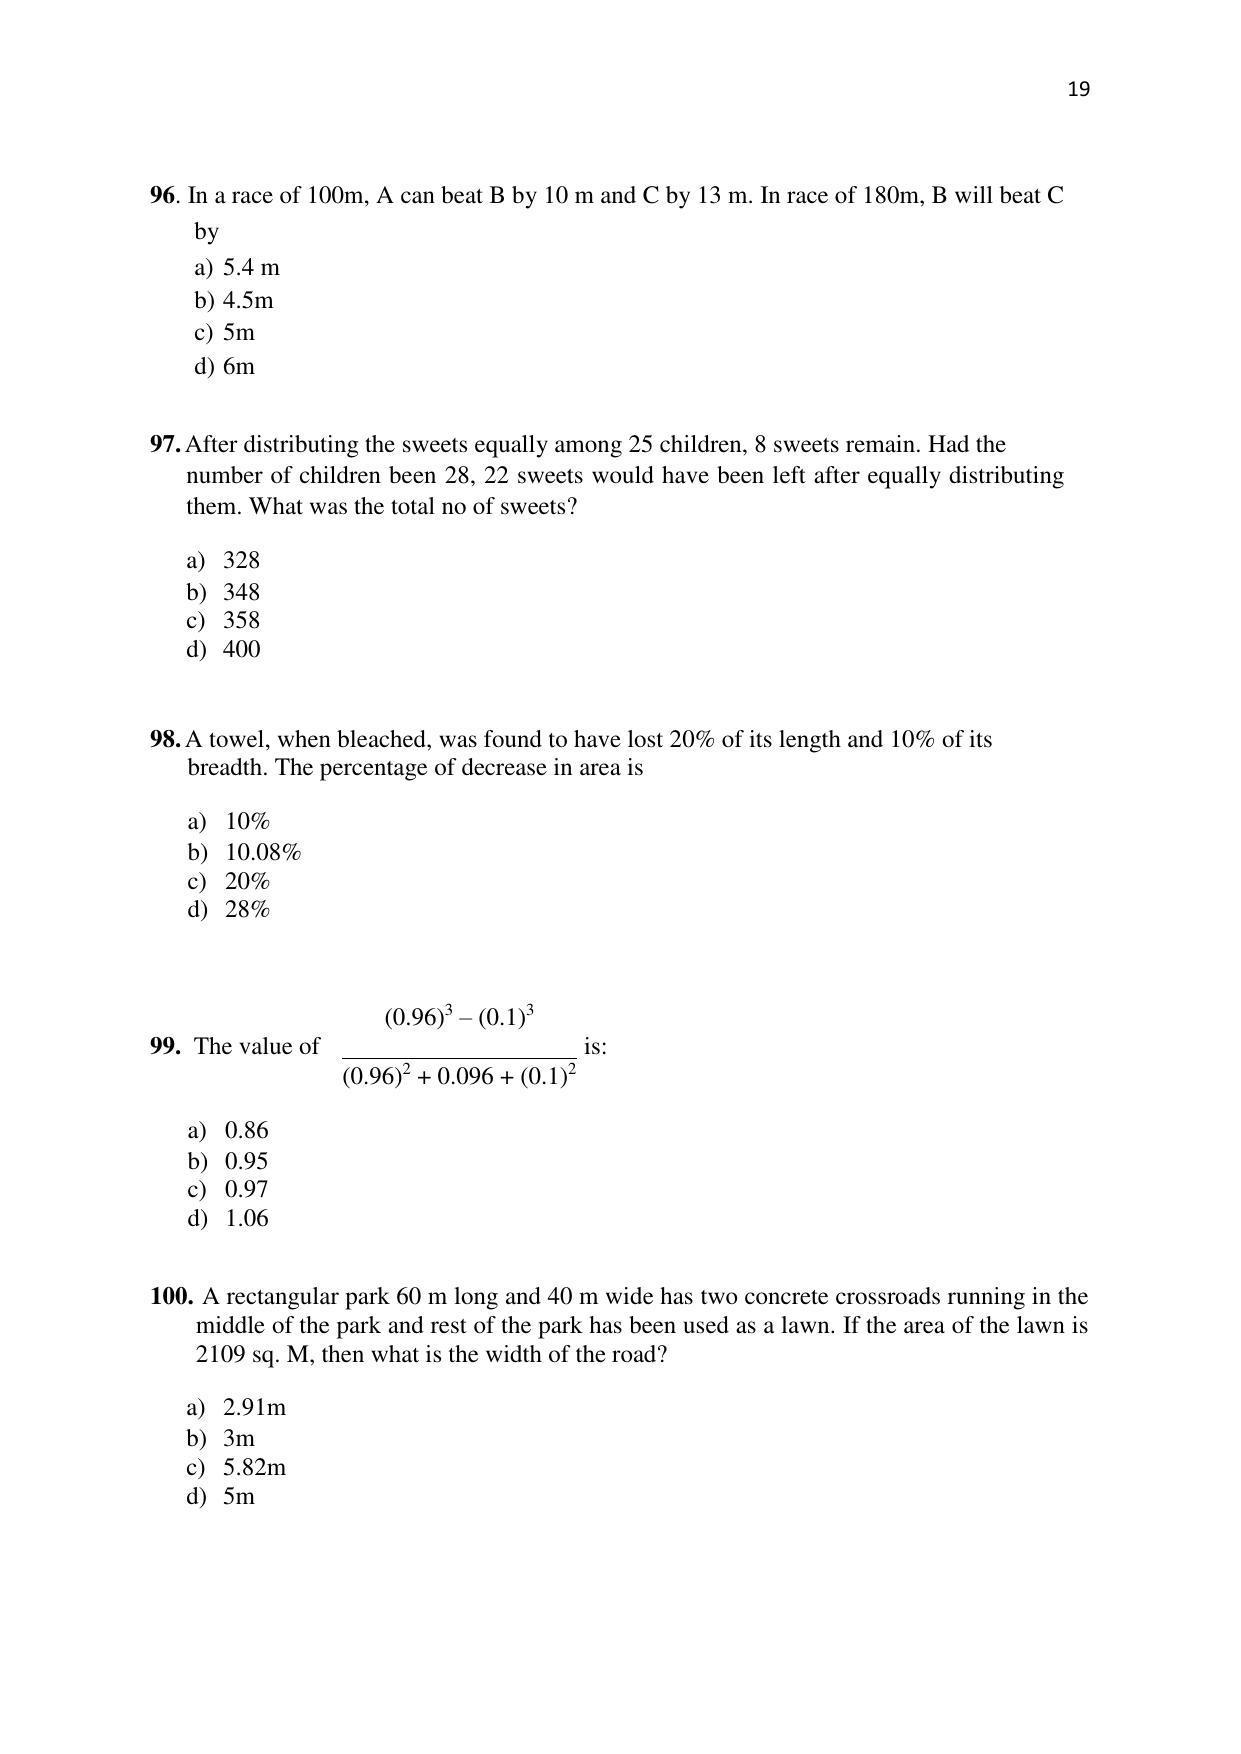 KMAT Question Papers - November 2016 - Page 19